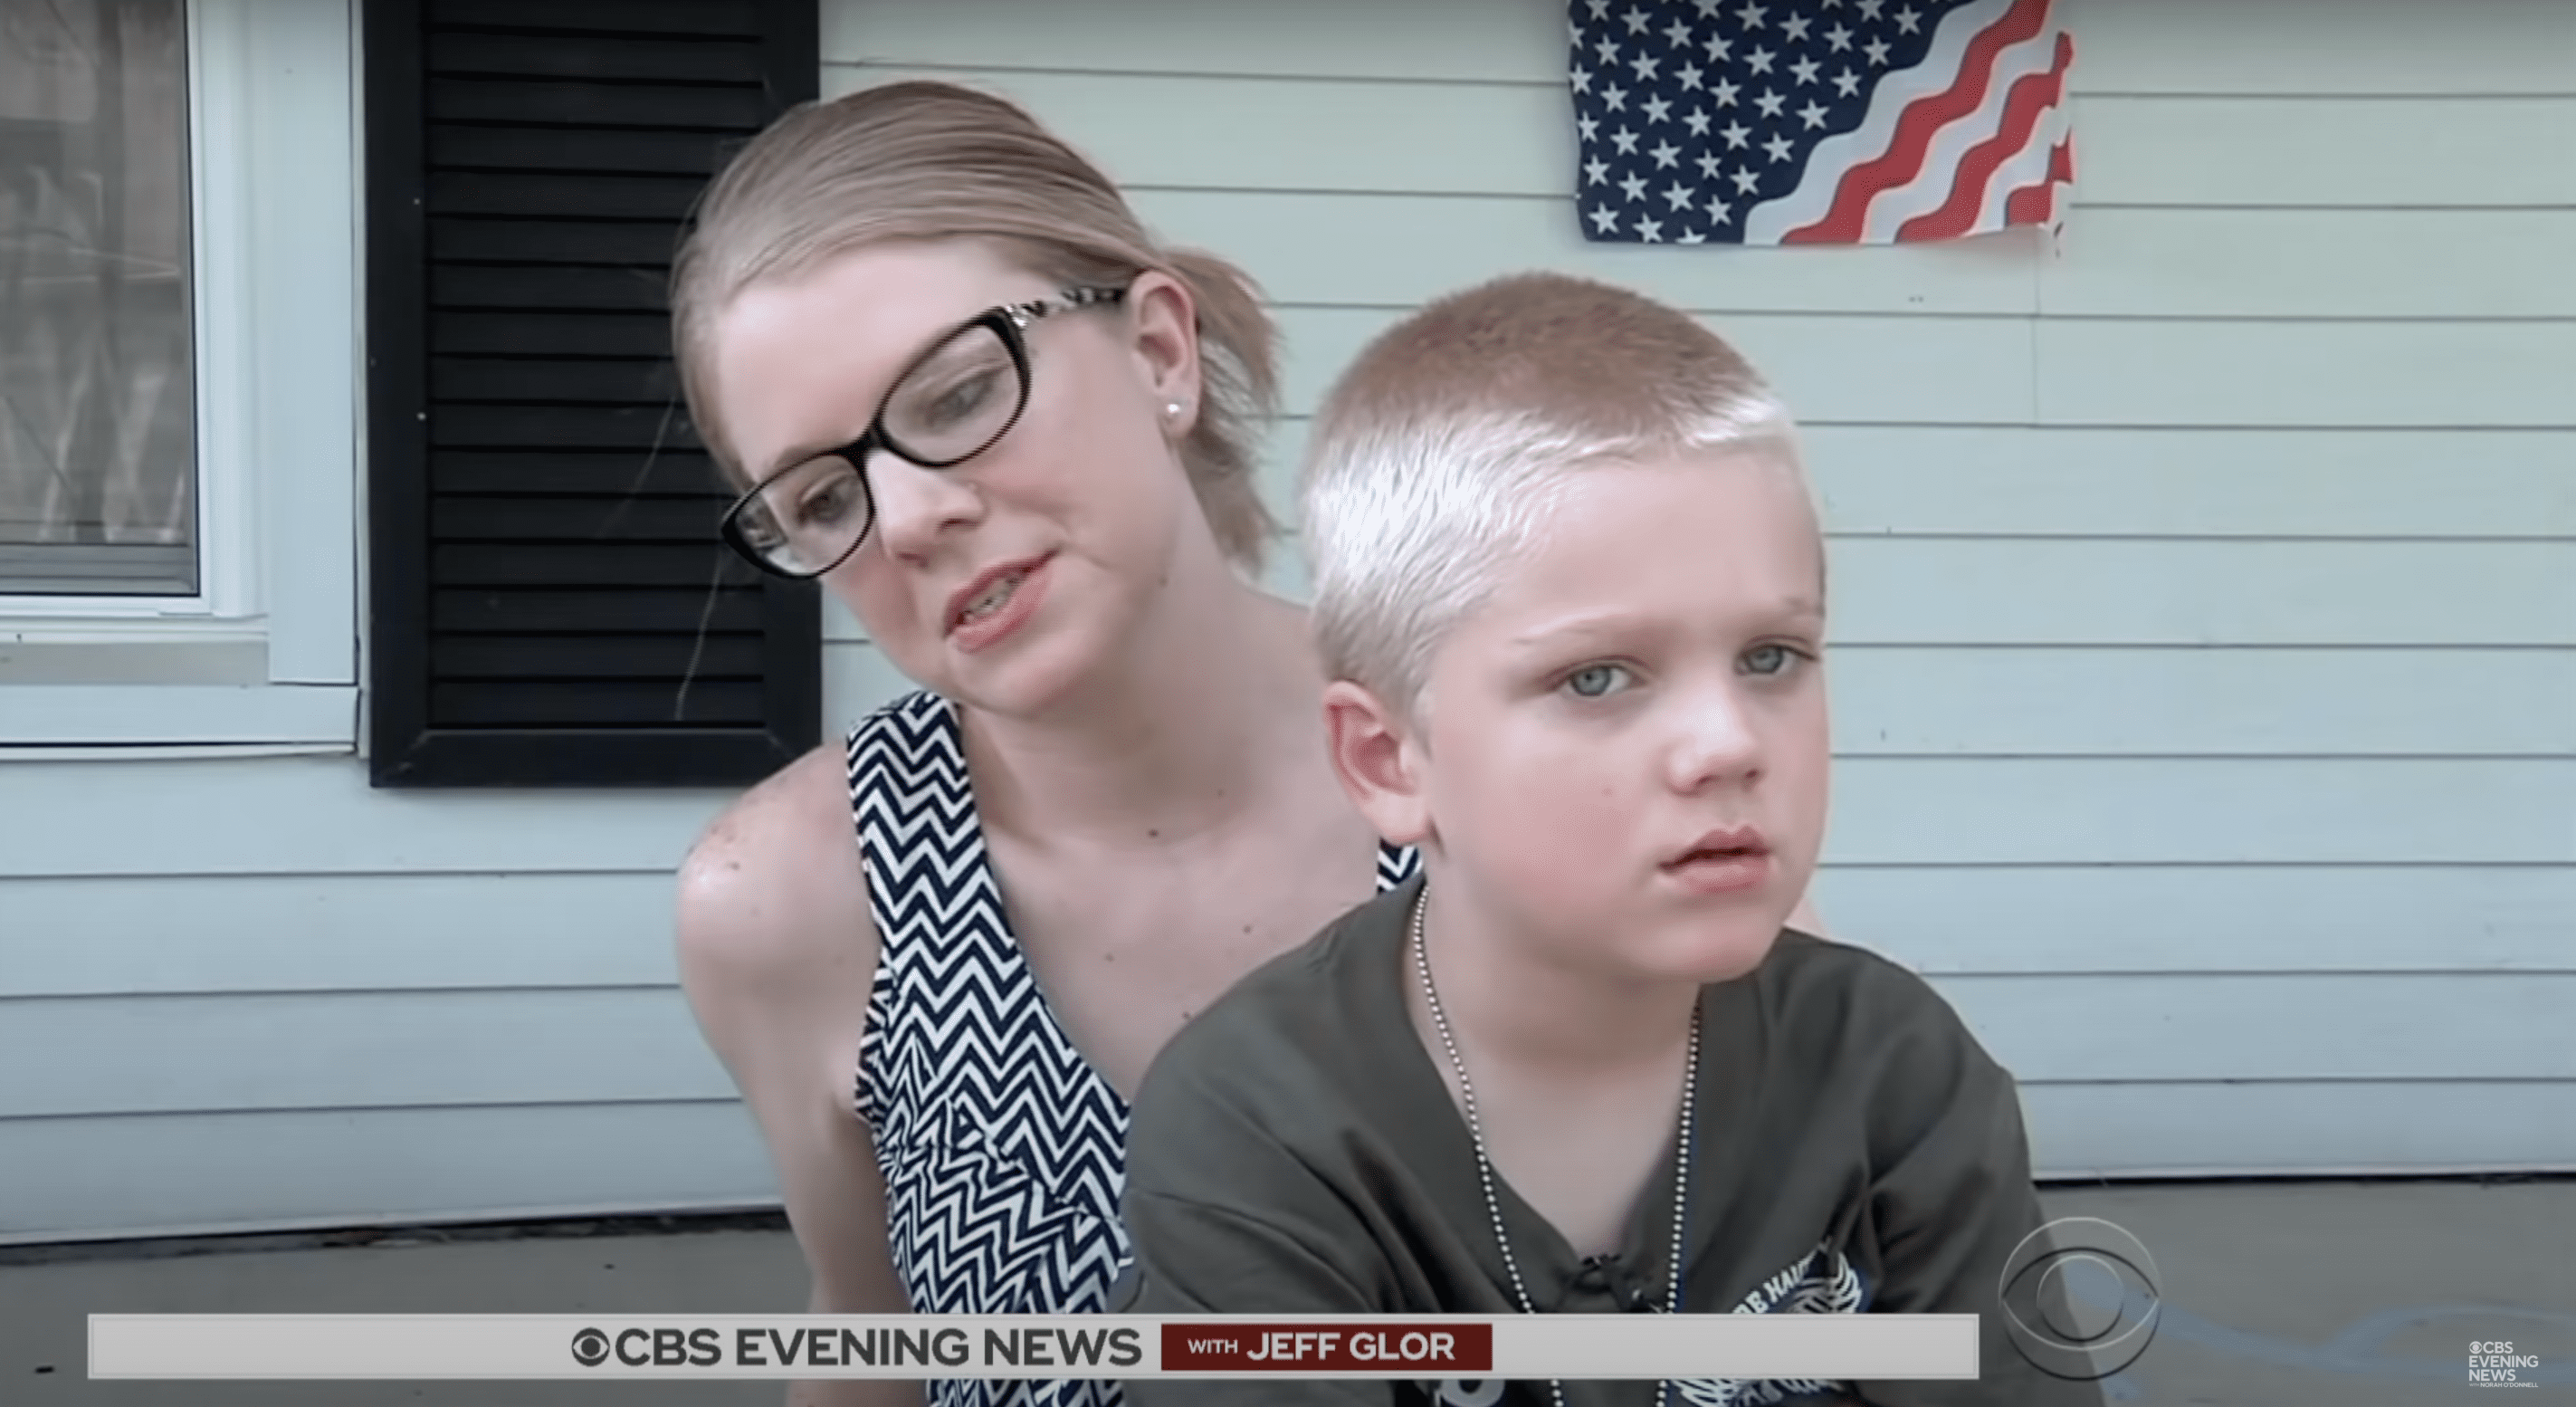 Dakota Pitts with his mother. | Source: YouTube.com/CBS Evening News